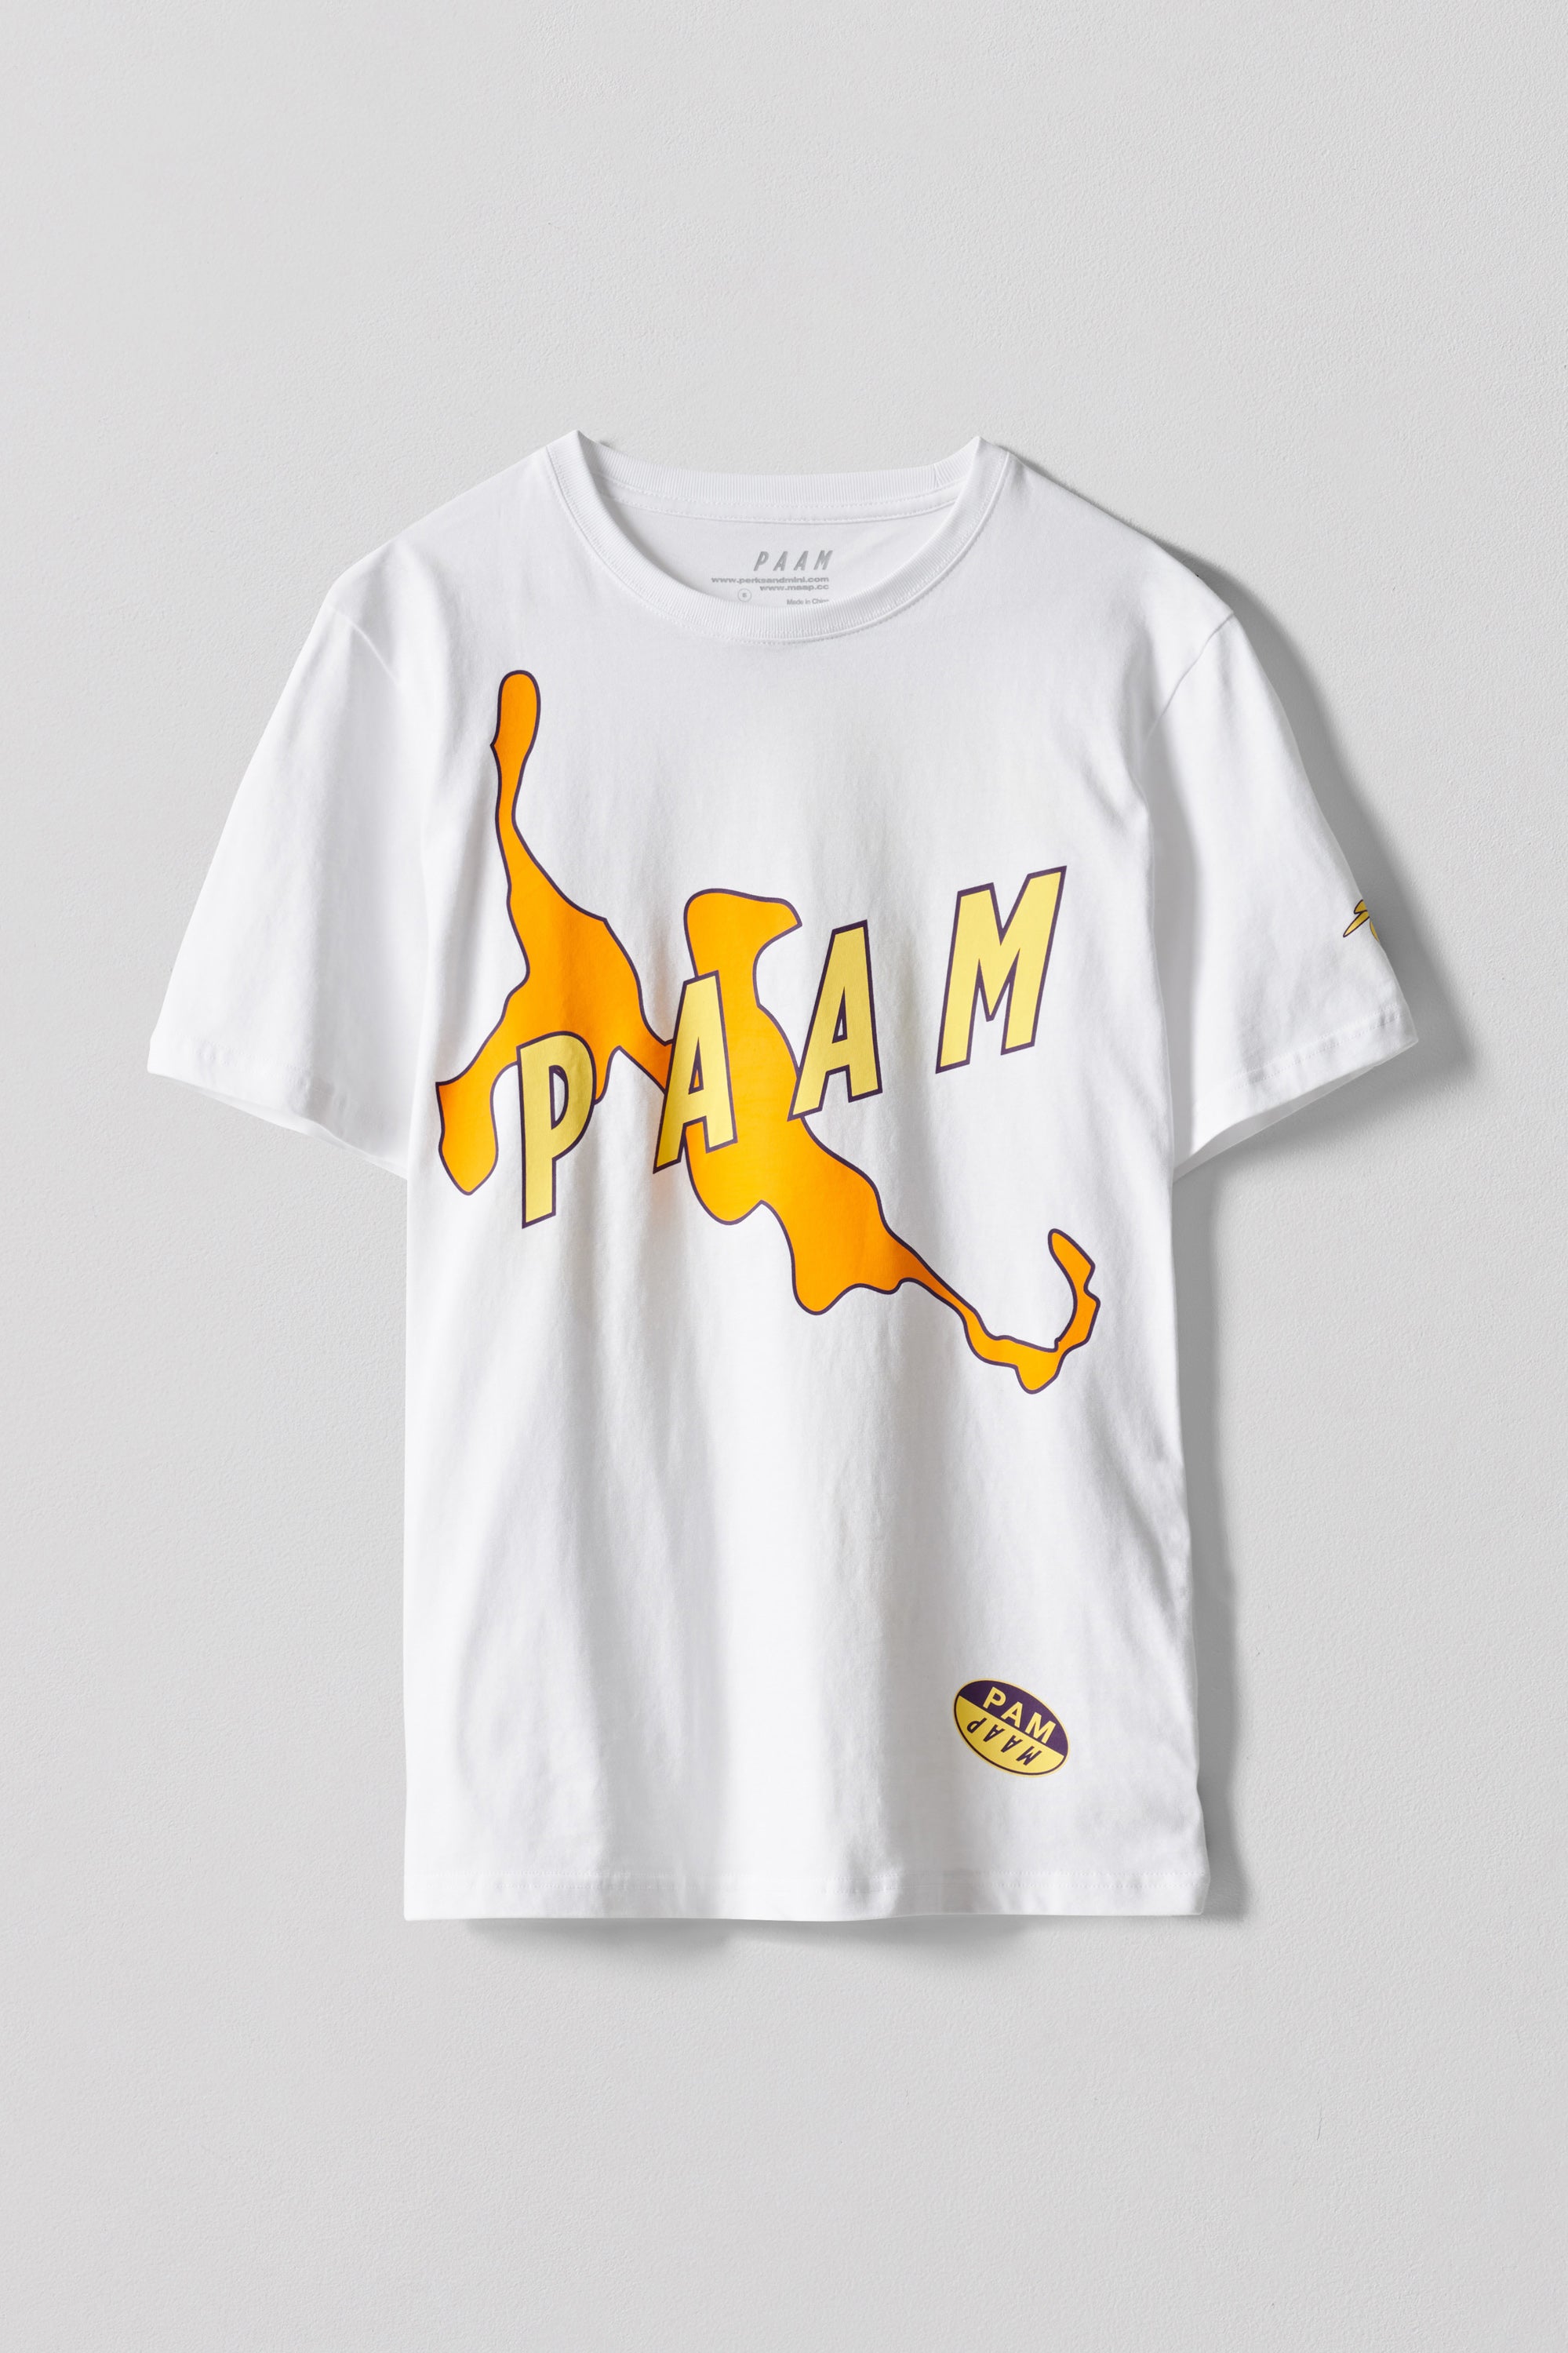 The PAAM 1.5 SS TEE WHITE available online with global shipping, and in PAM Stores Melbourne and Sydney.